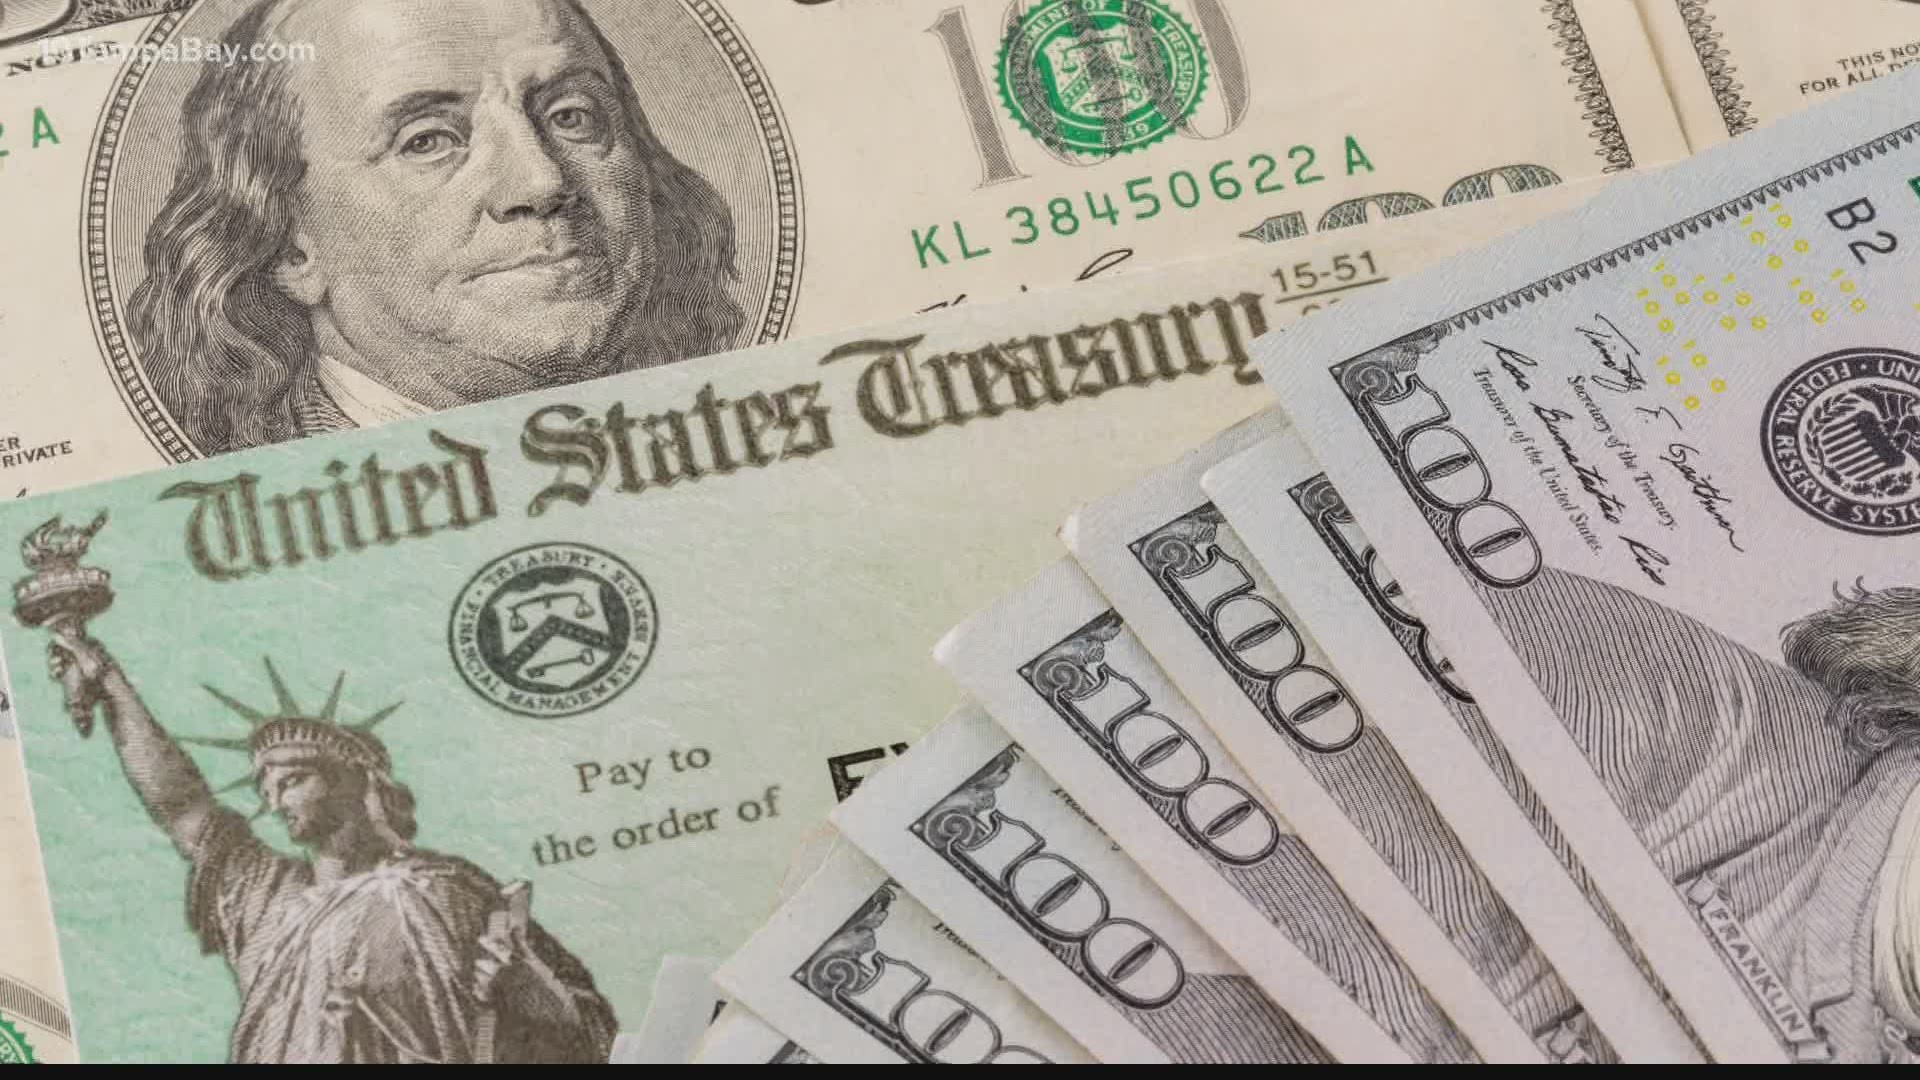 You can still get the $1,200 from the first round of stimulus checks. Here's how to make sure you get all your stimulus check money.